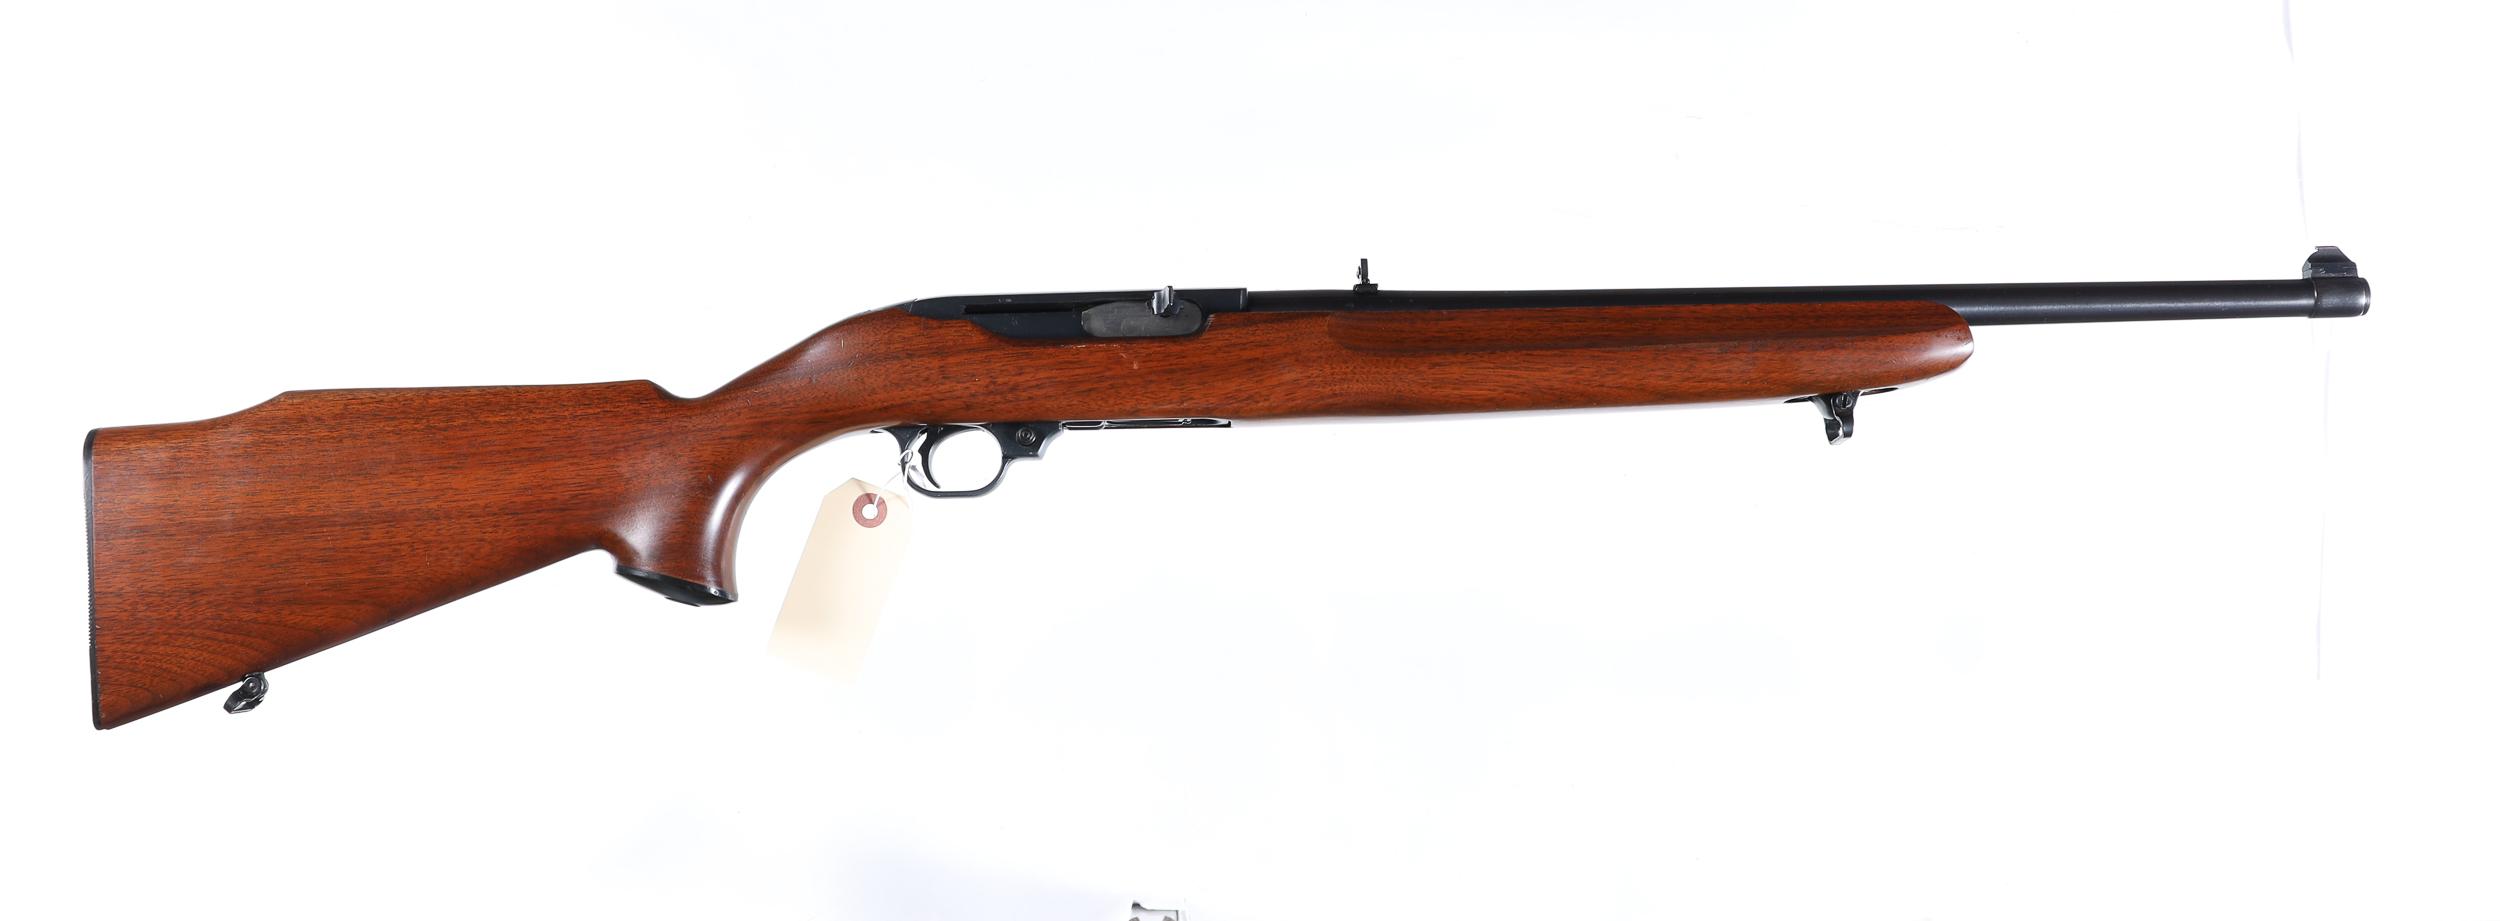 Ruger Carbine Semi Rifle .44 mag